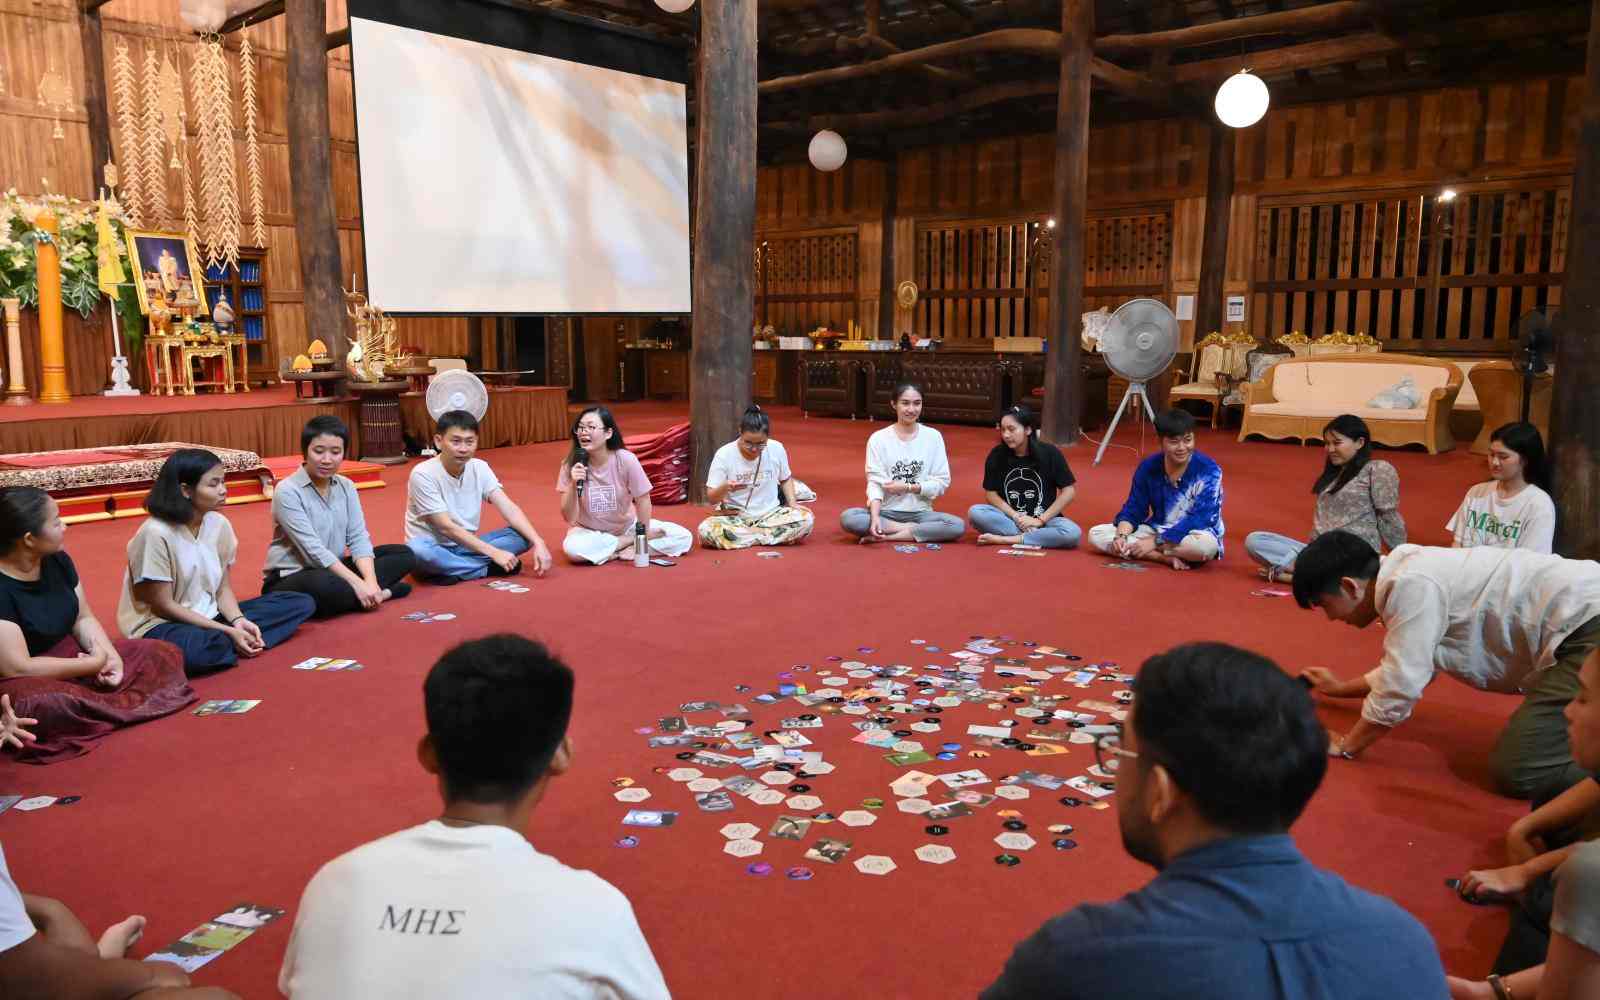 A circle of people sitting on a carpeted floor with tokens in the middle